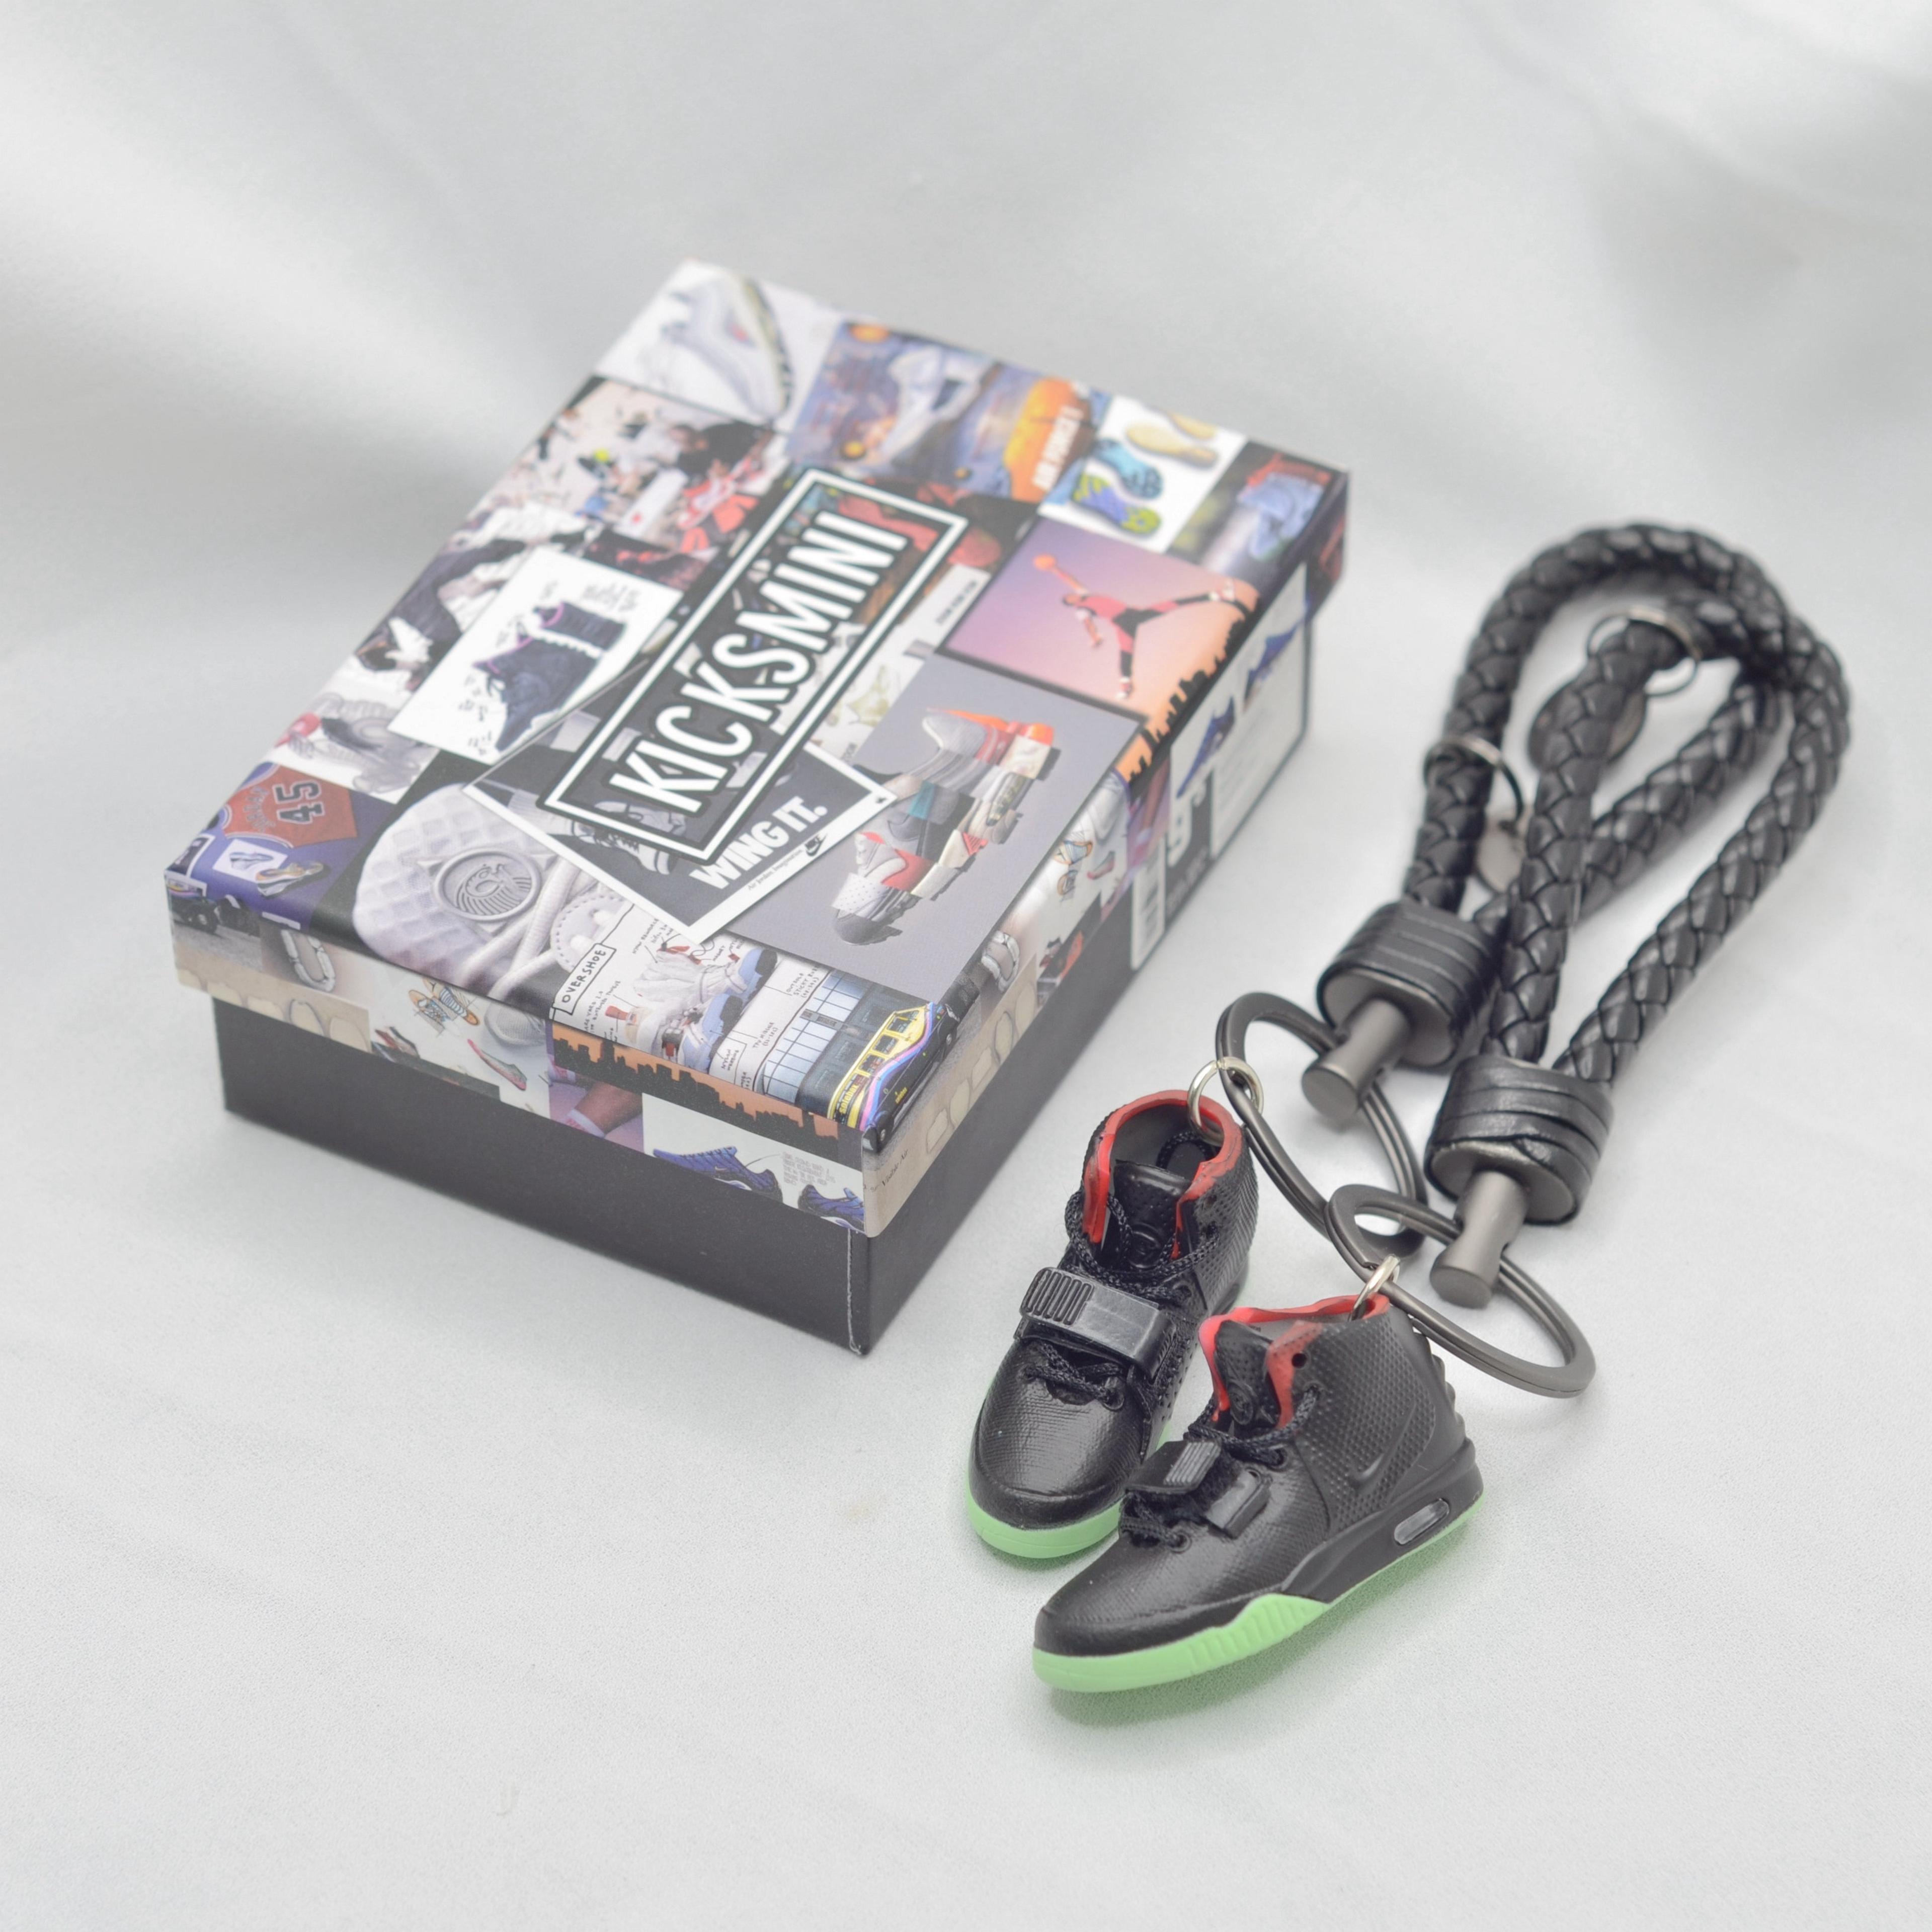 Alternate View 7 of Yeezy/NMD Collaboration 3D Mini Sneakers Keychain with BV Rope/B